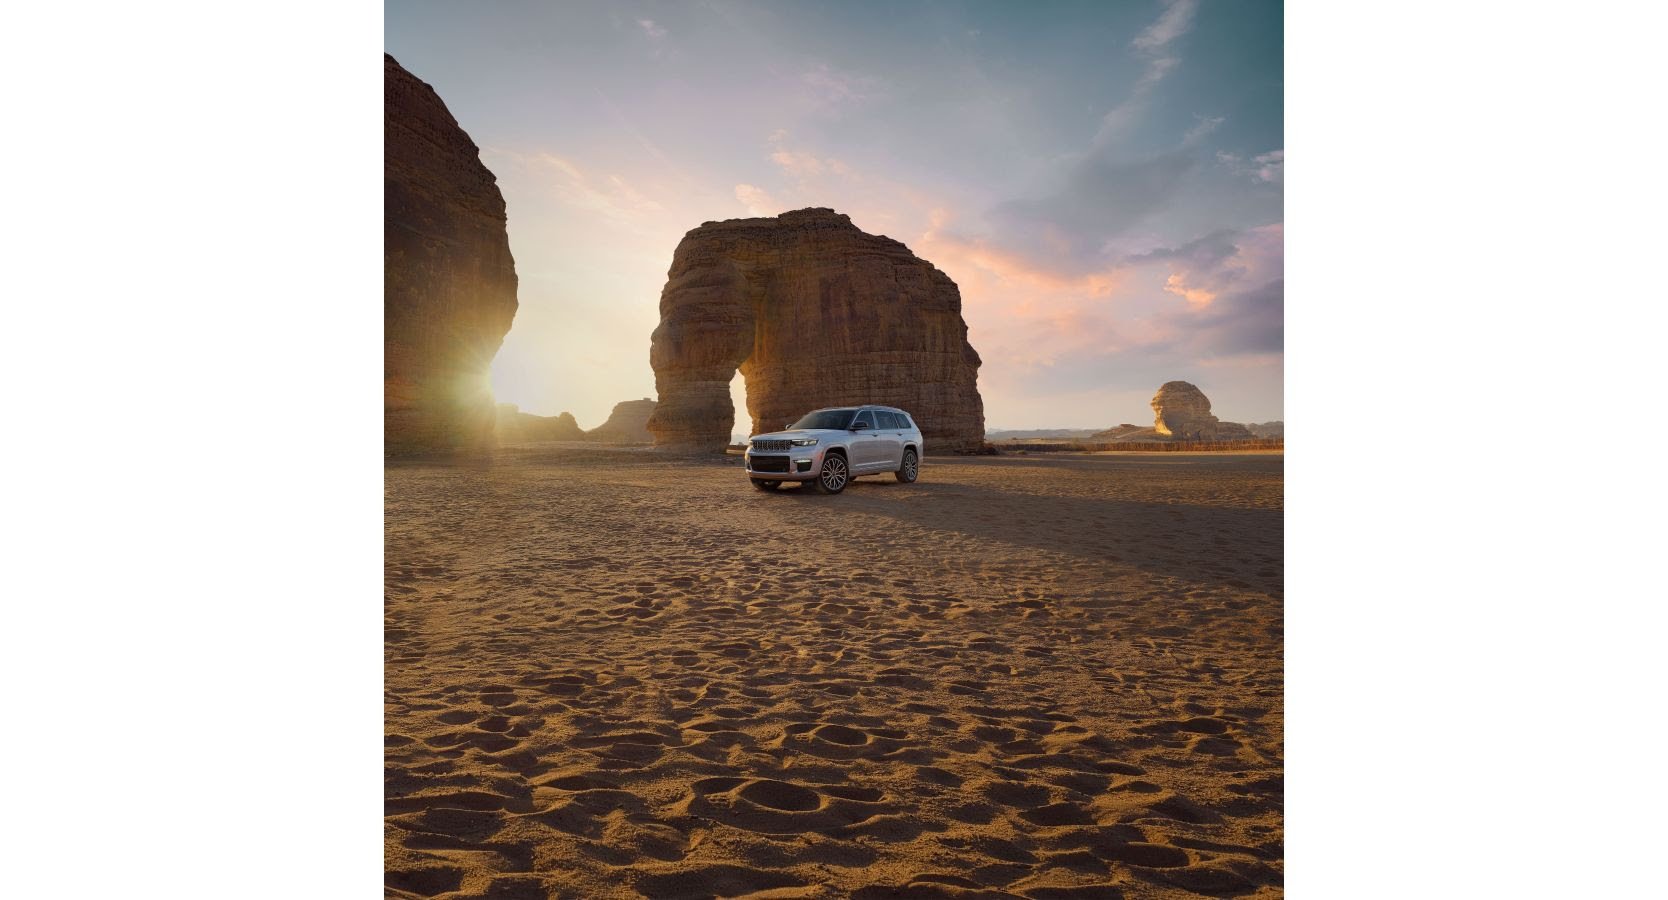 JEEP® LAUNCHES THE ALL-NEW 5-SEATER GRAND CHEROKEE IN THE KINGDOM OF SAUDI ARABIA MARKING A NEW ERA OF REFINEMENT